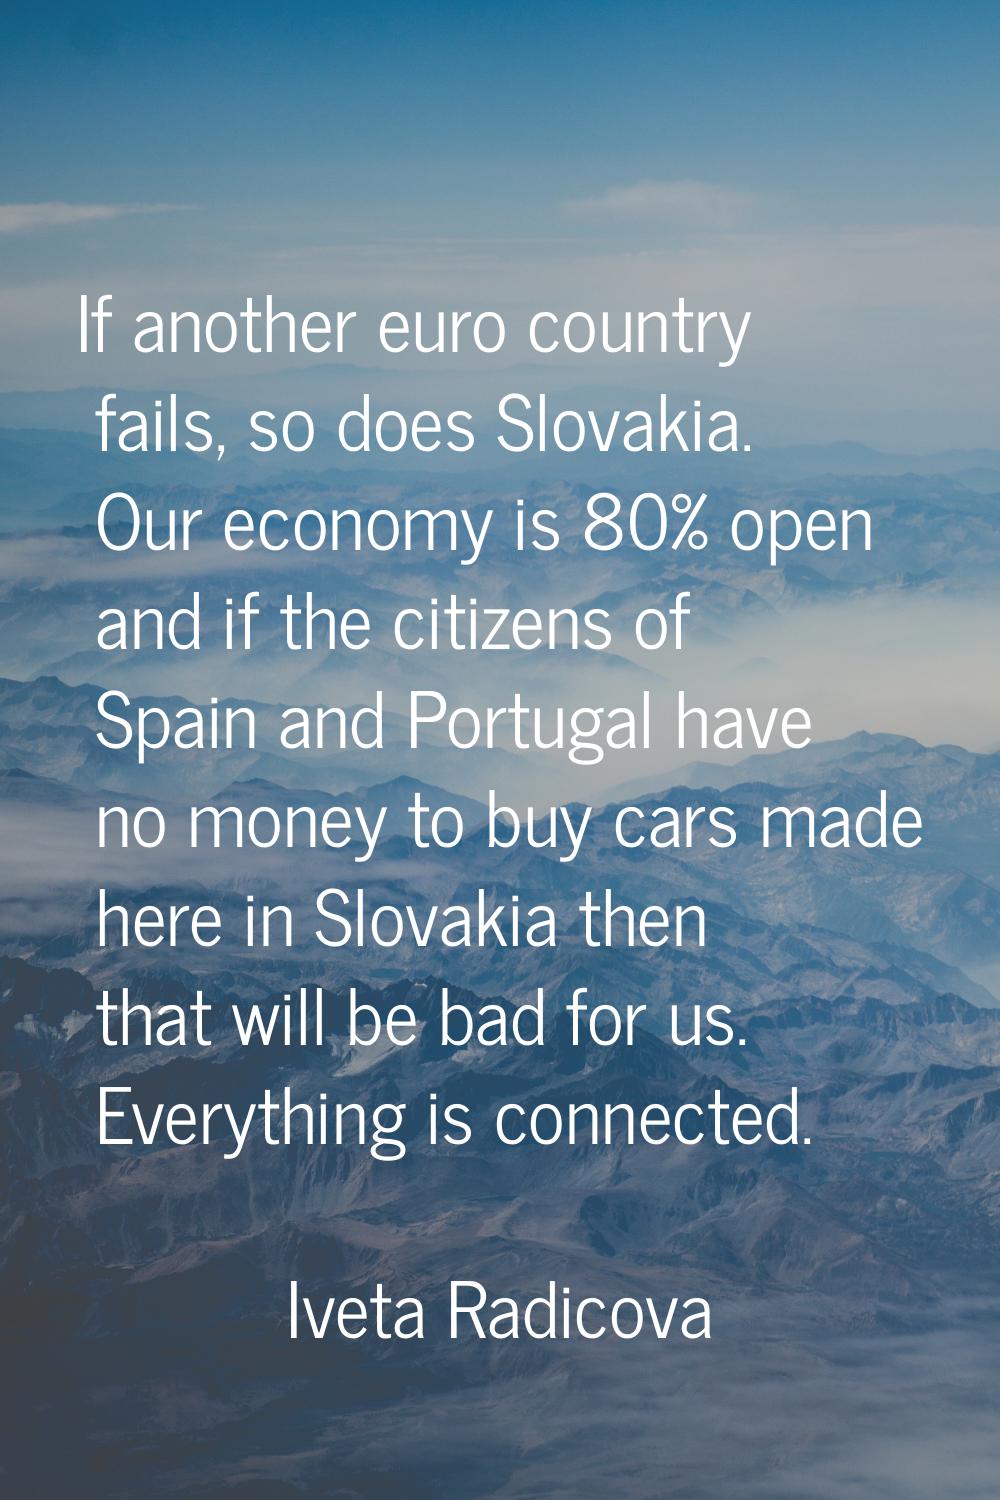 If another euro country fails, so does Slovakia. Our economy is 80% open and if the citizens of Spa